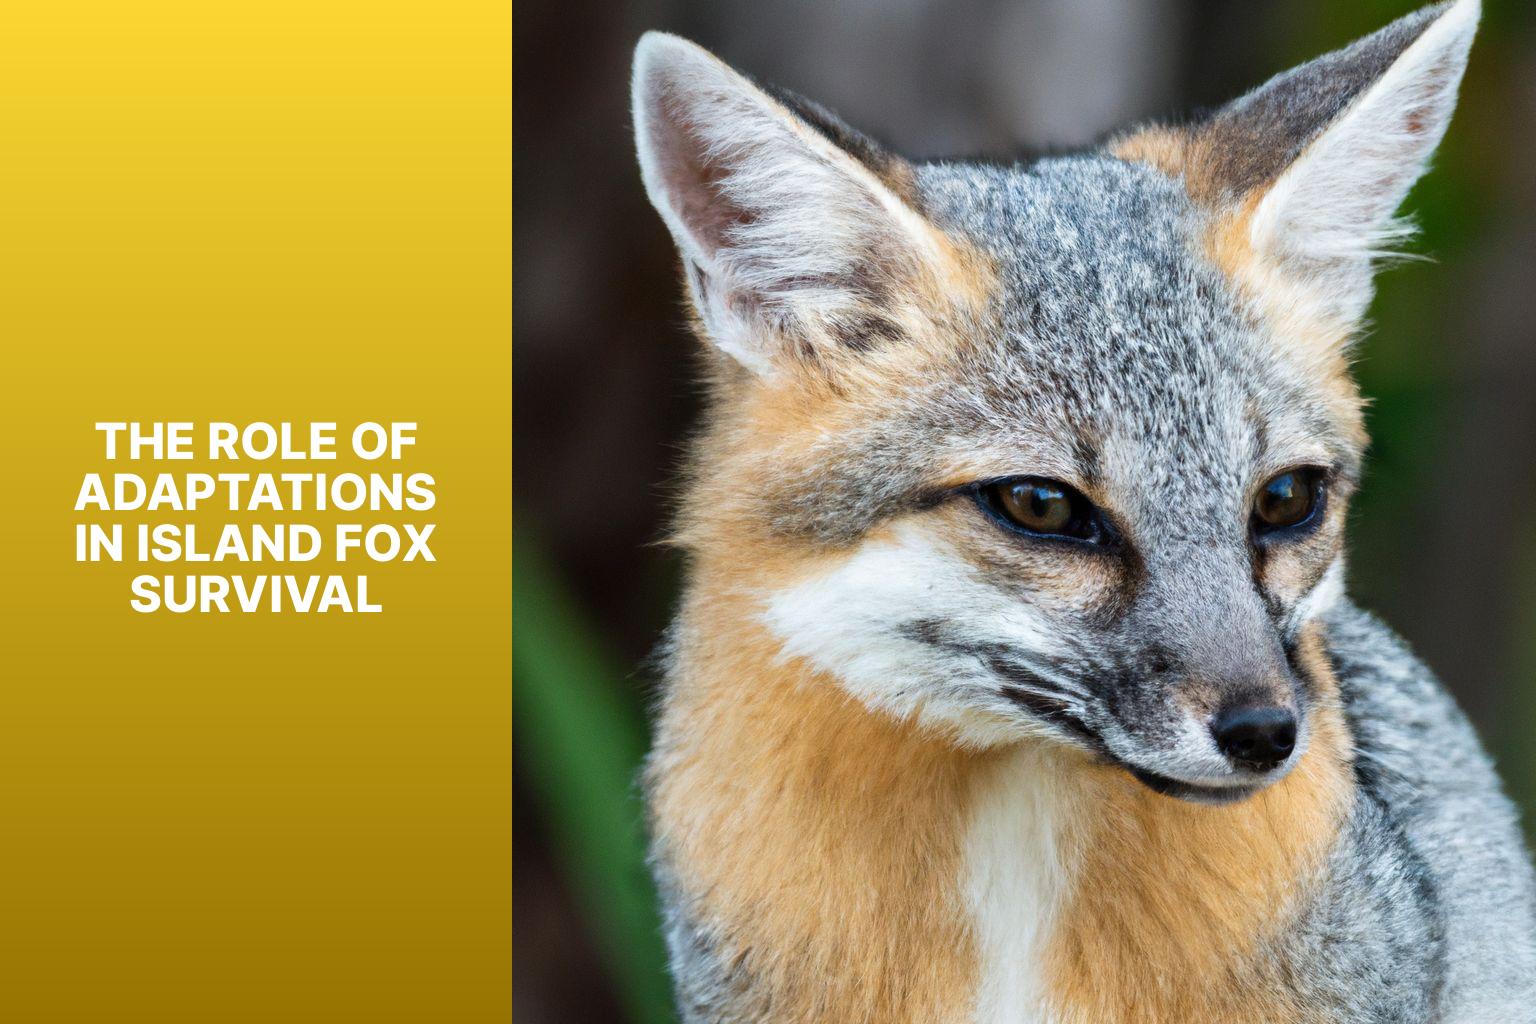 The Role of Adaptations in Island Fox Survival - Island Fox Adaptations 